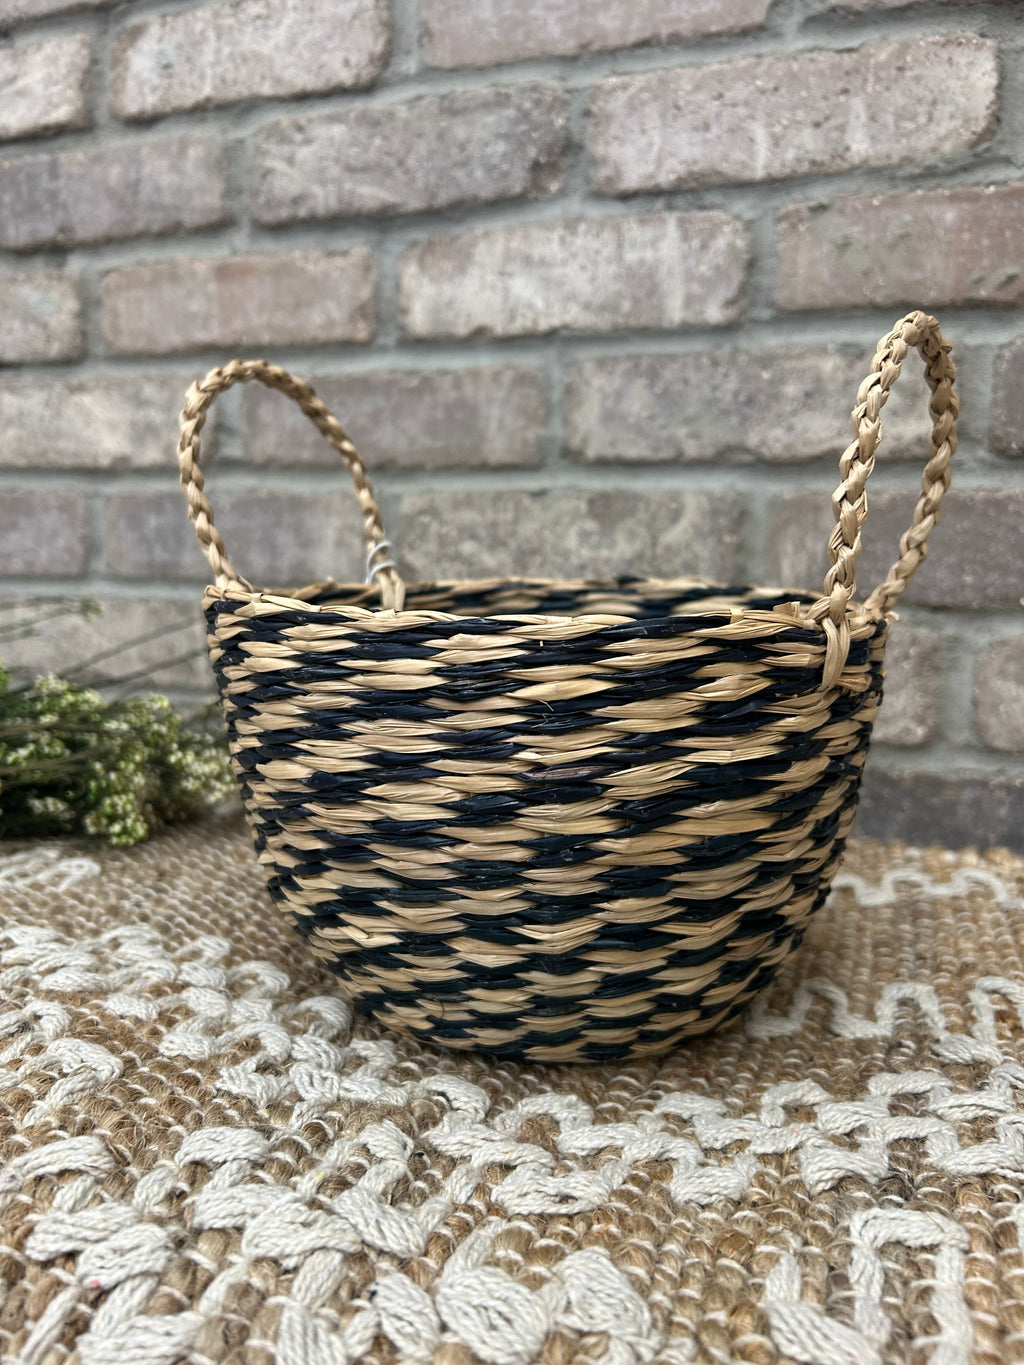 Large Woven Seagrass Basket with Handles